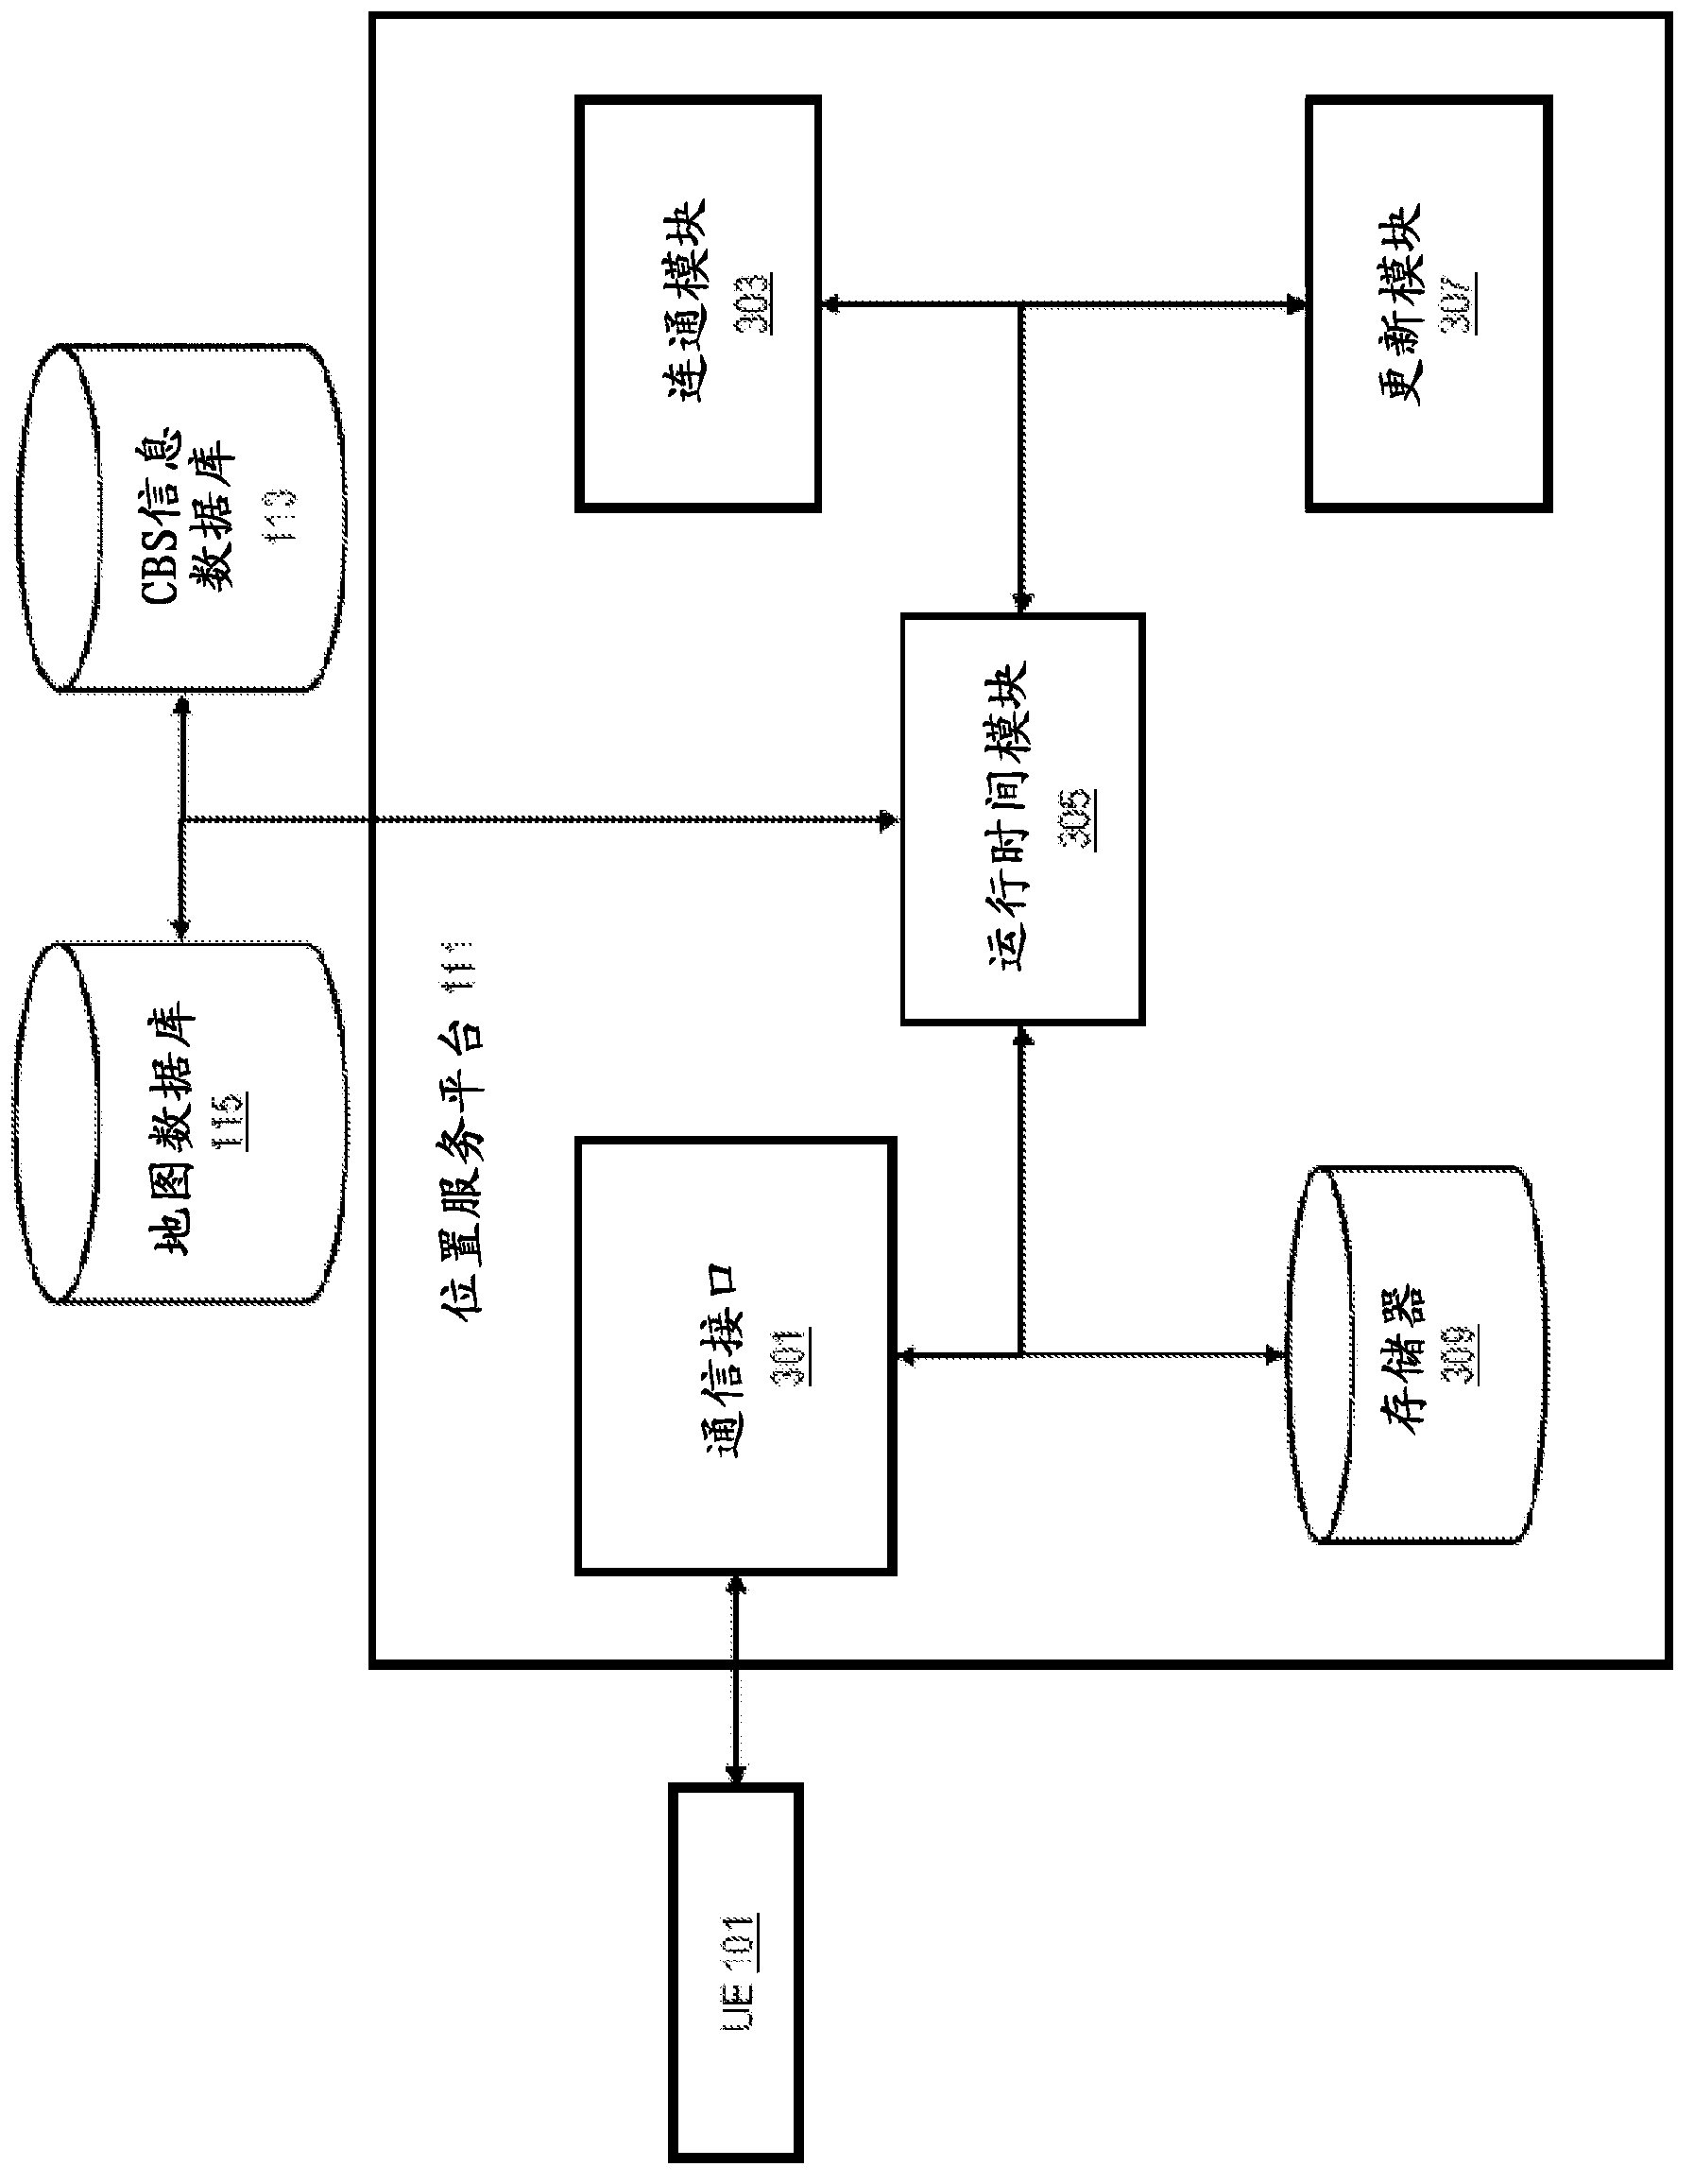 Method and apparatus for grouping points-of-interest according to area names